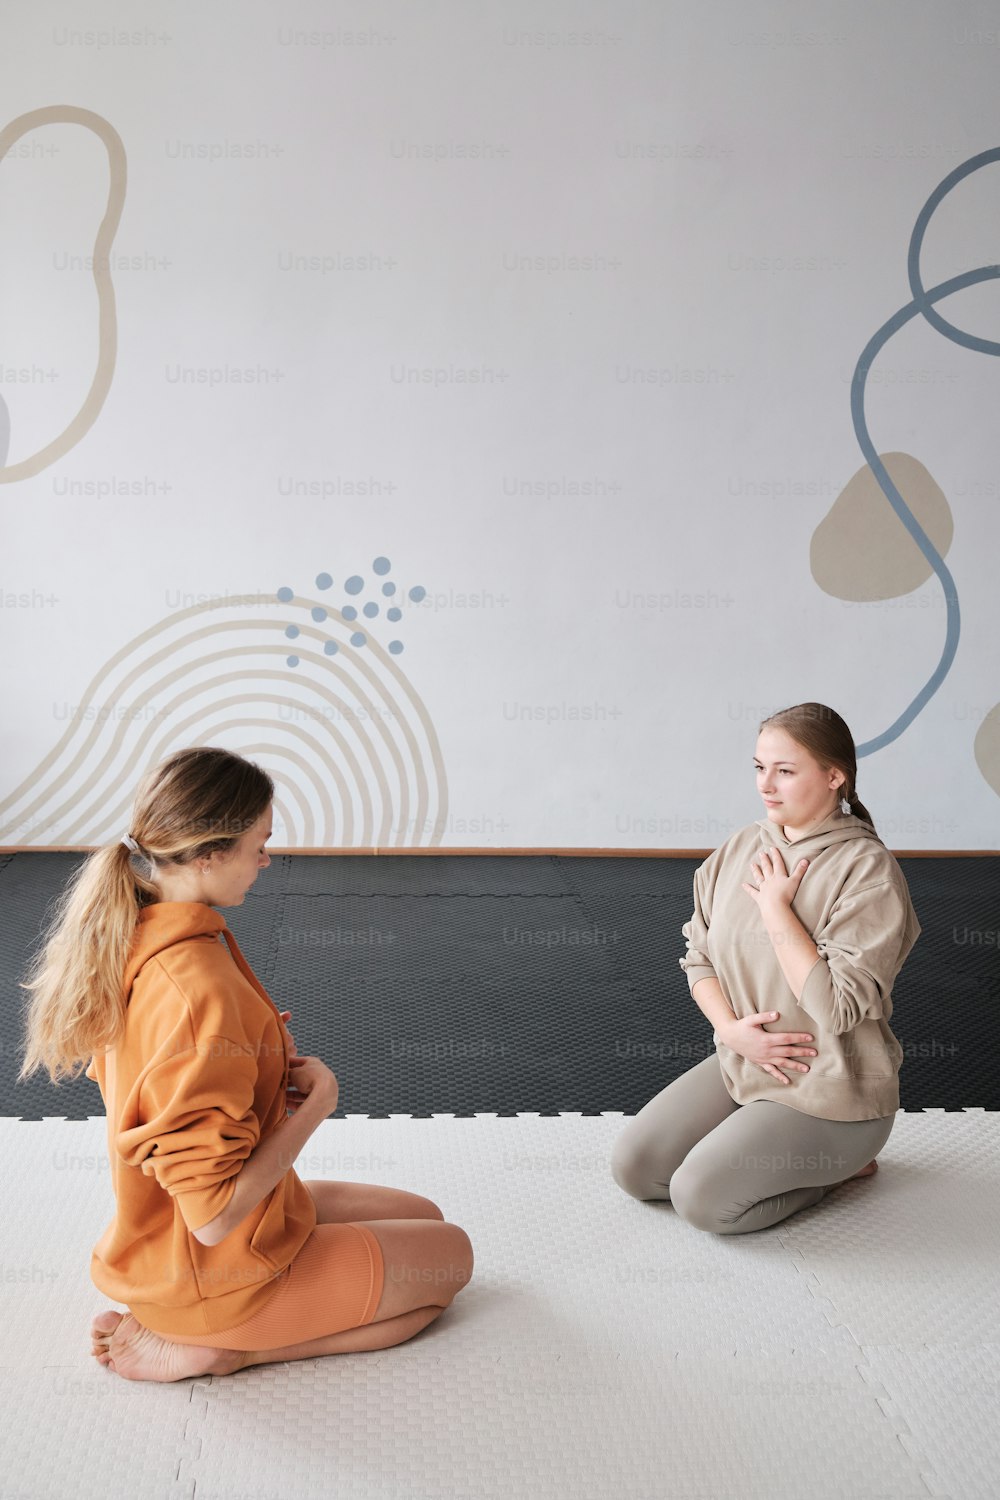 a woman sitting on a mat talking to another woman